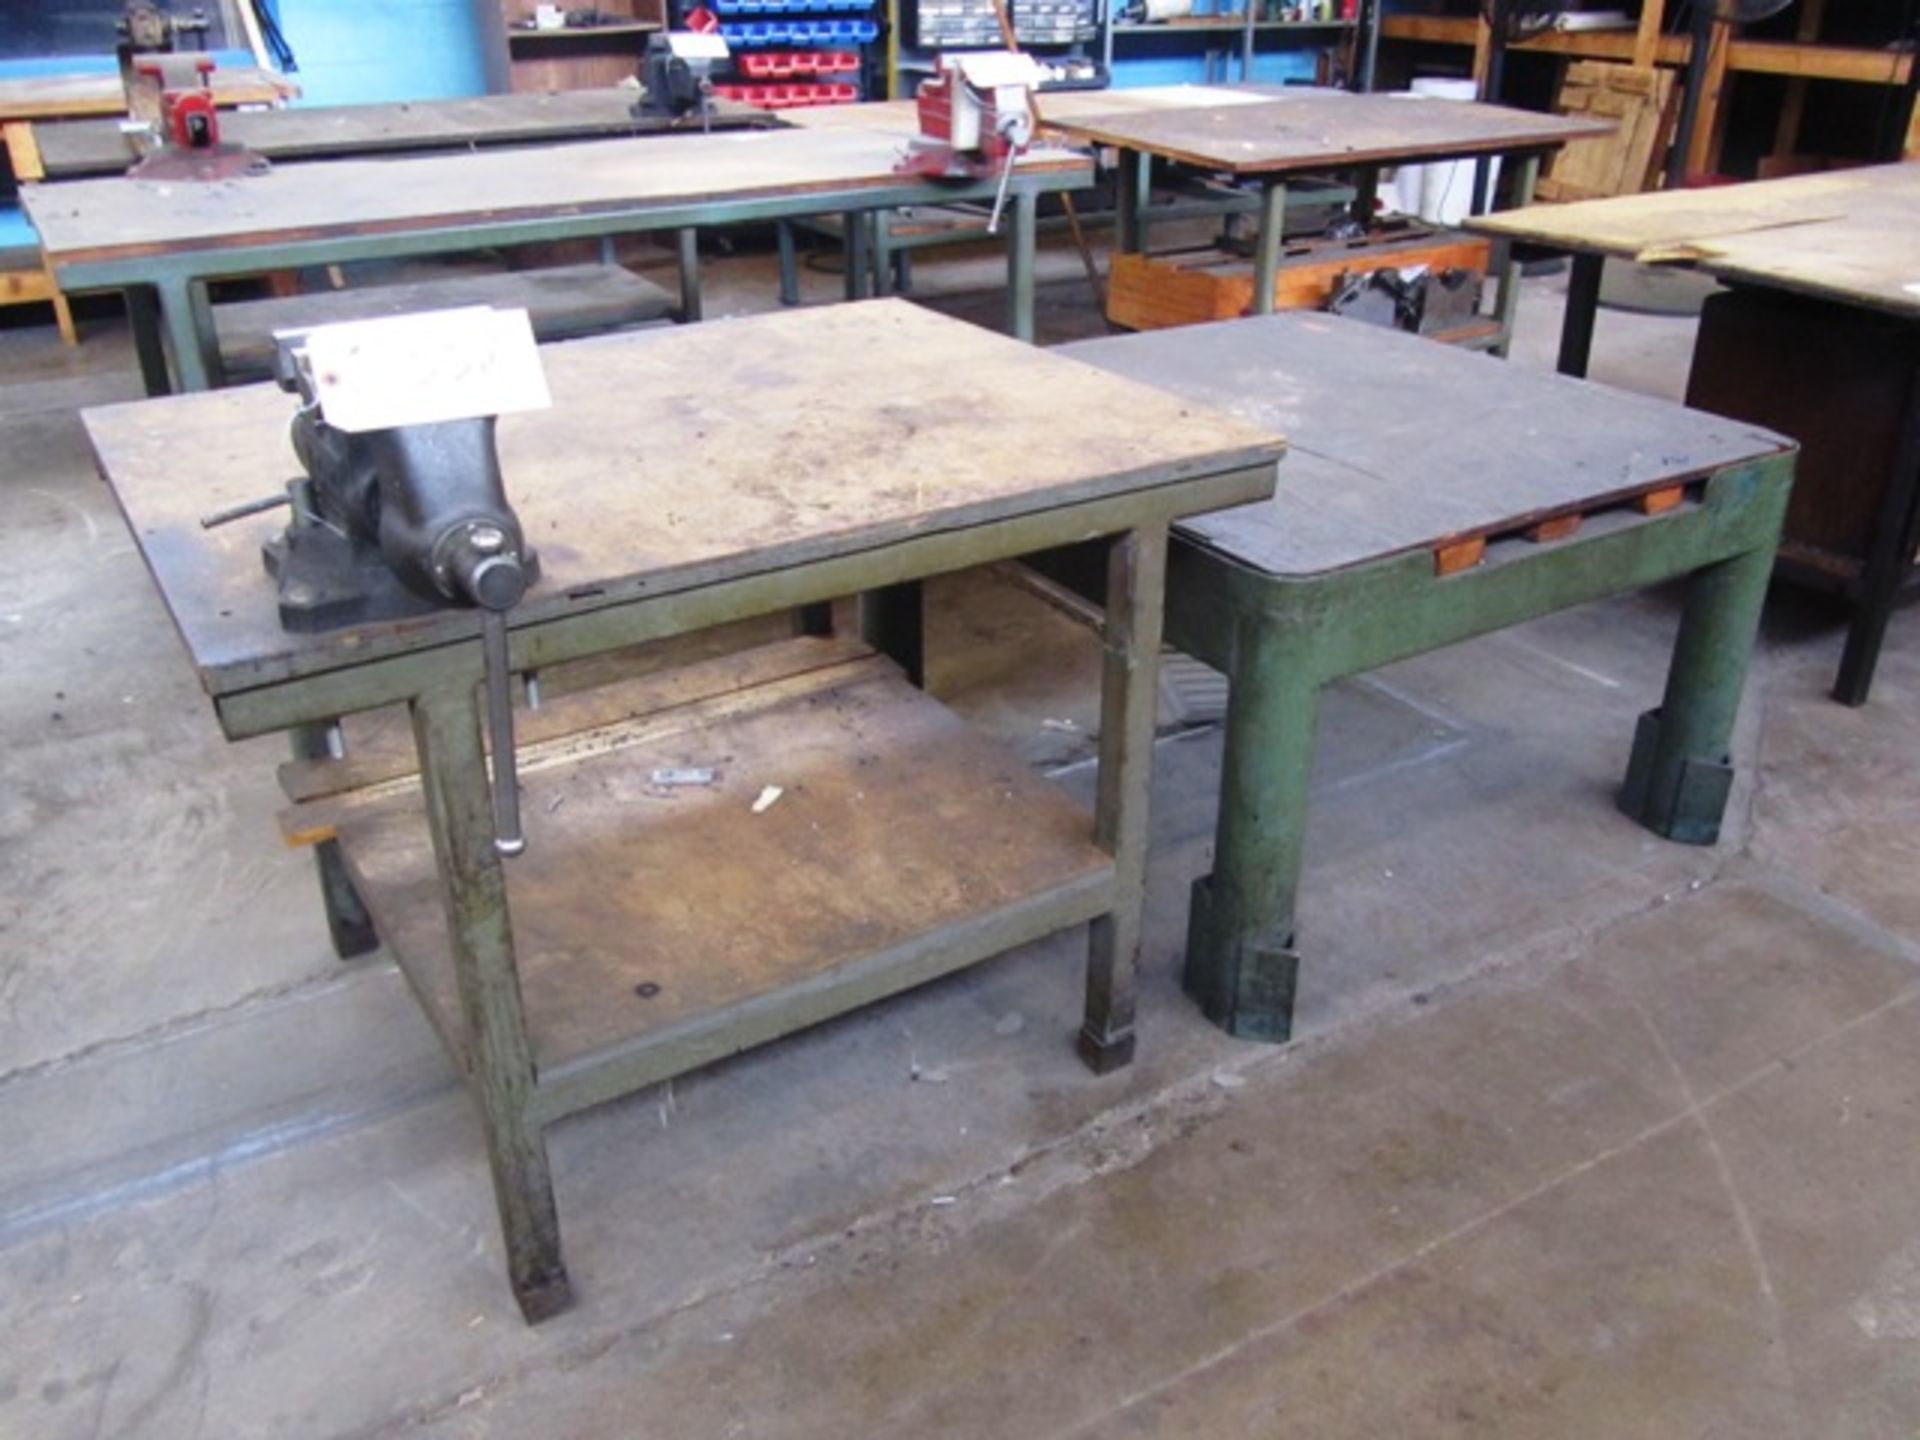 (2) Workbenches - (1) with Vise